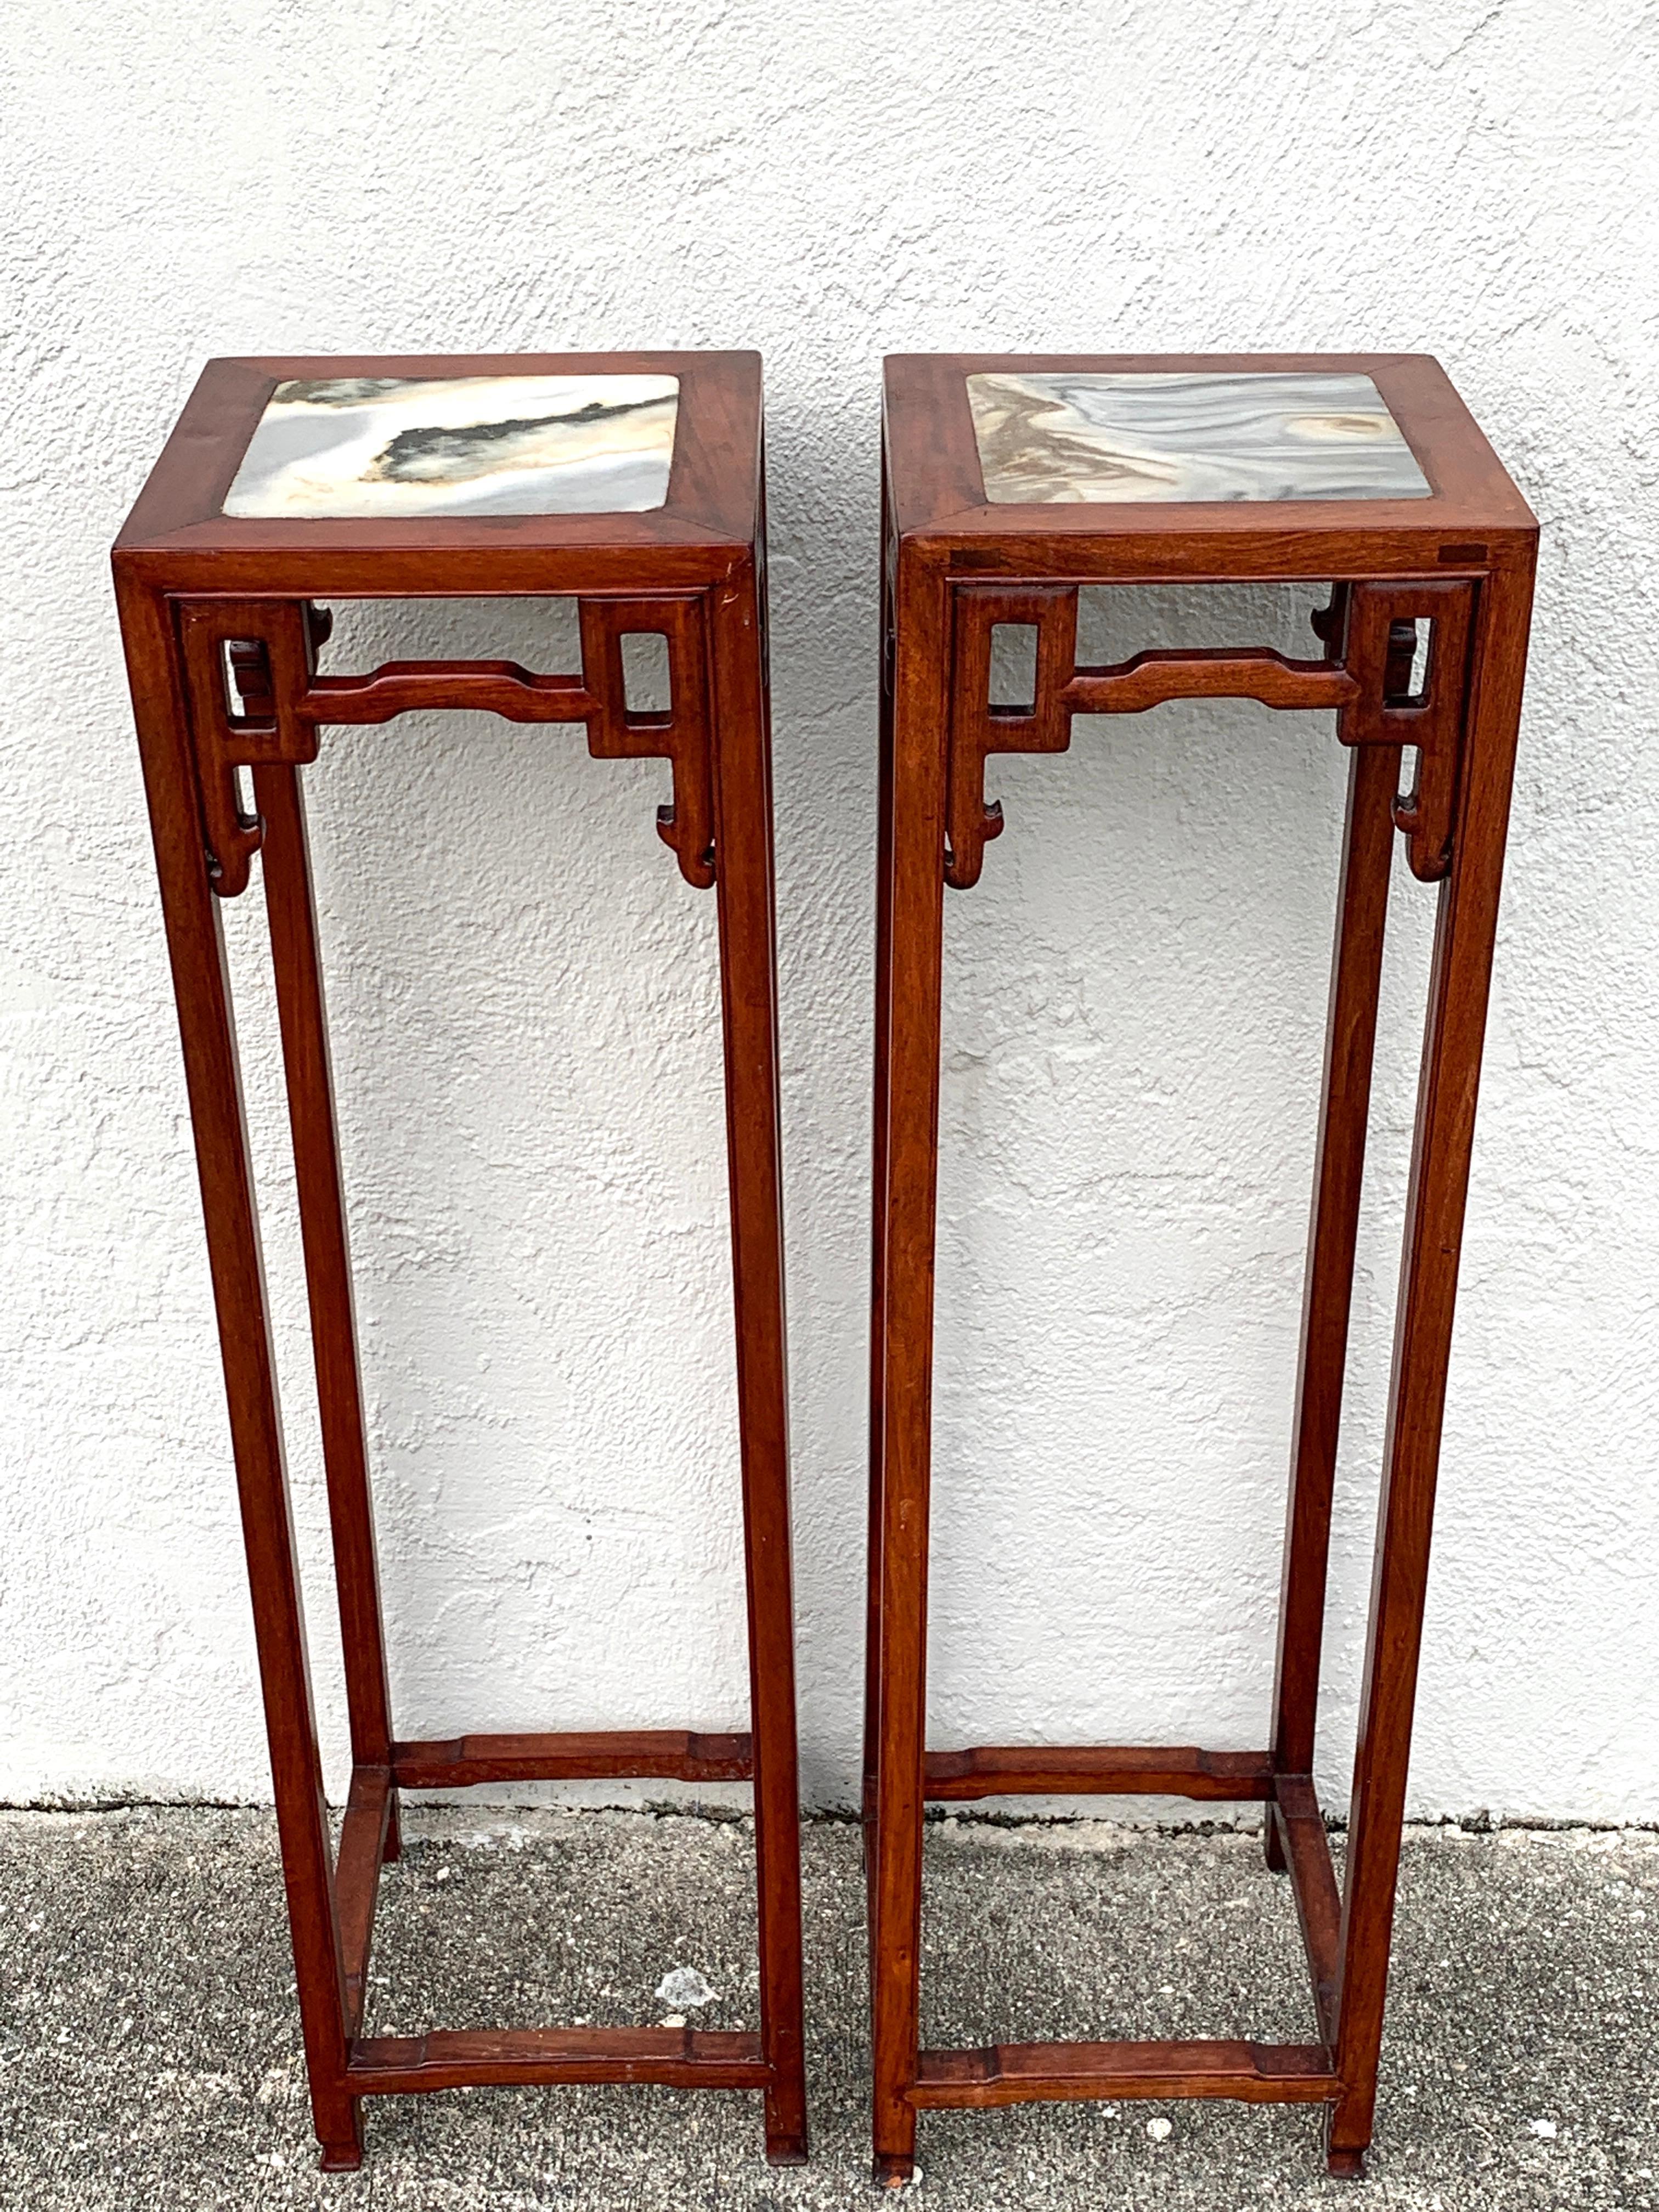 Pair of Chinese Export Hardwood and Marble Pedestals In Good Condition For Sale In West Palm Beach, FL